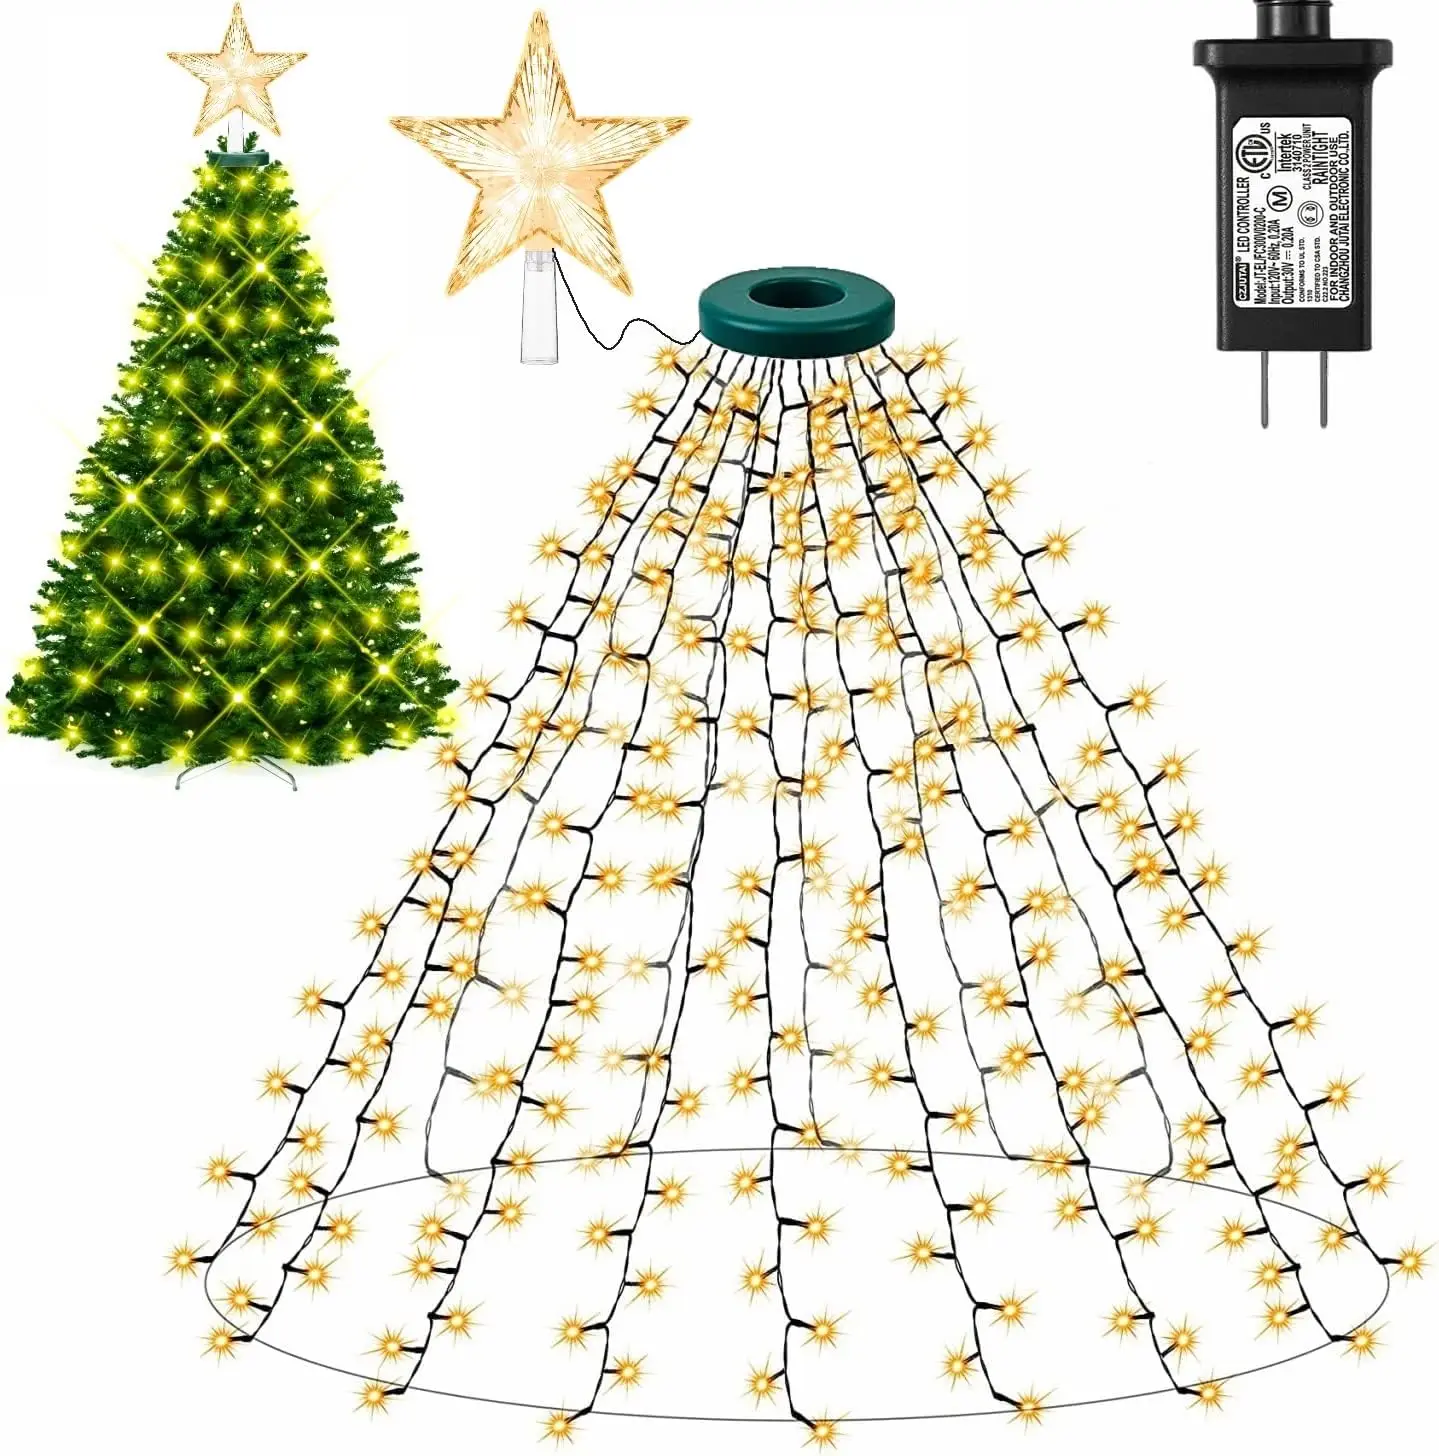 

400LED Christmas Tree Waterfall Lights with Star Topper Memory 8 Modes Timer Outdoor Twinkle Fairy String Light Xmas Party Decor